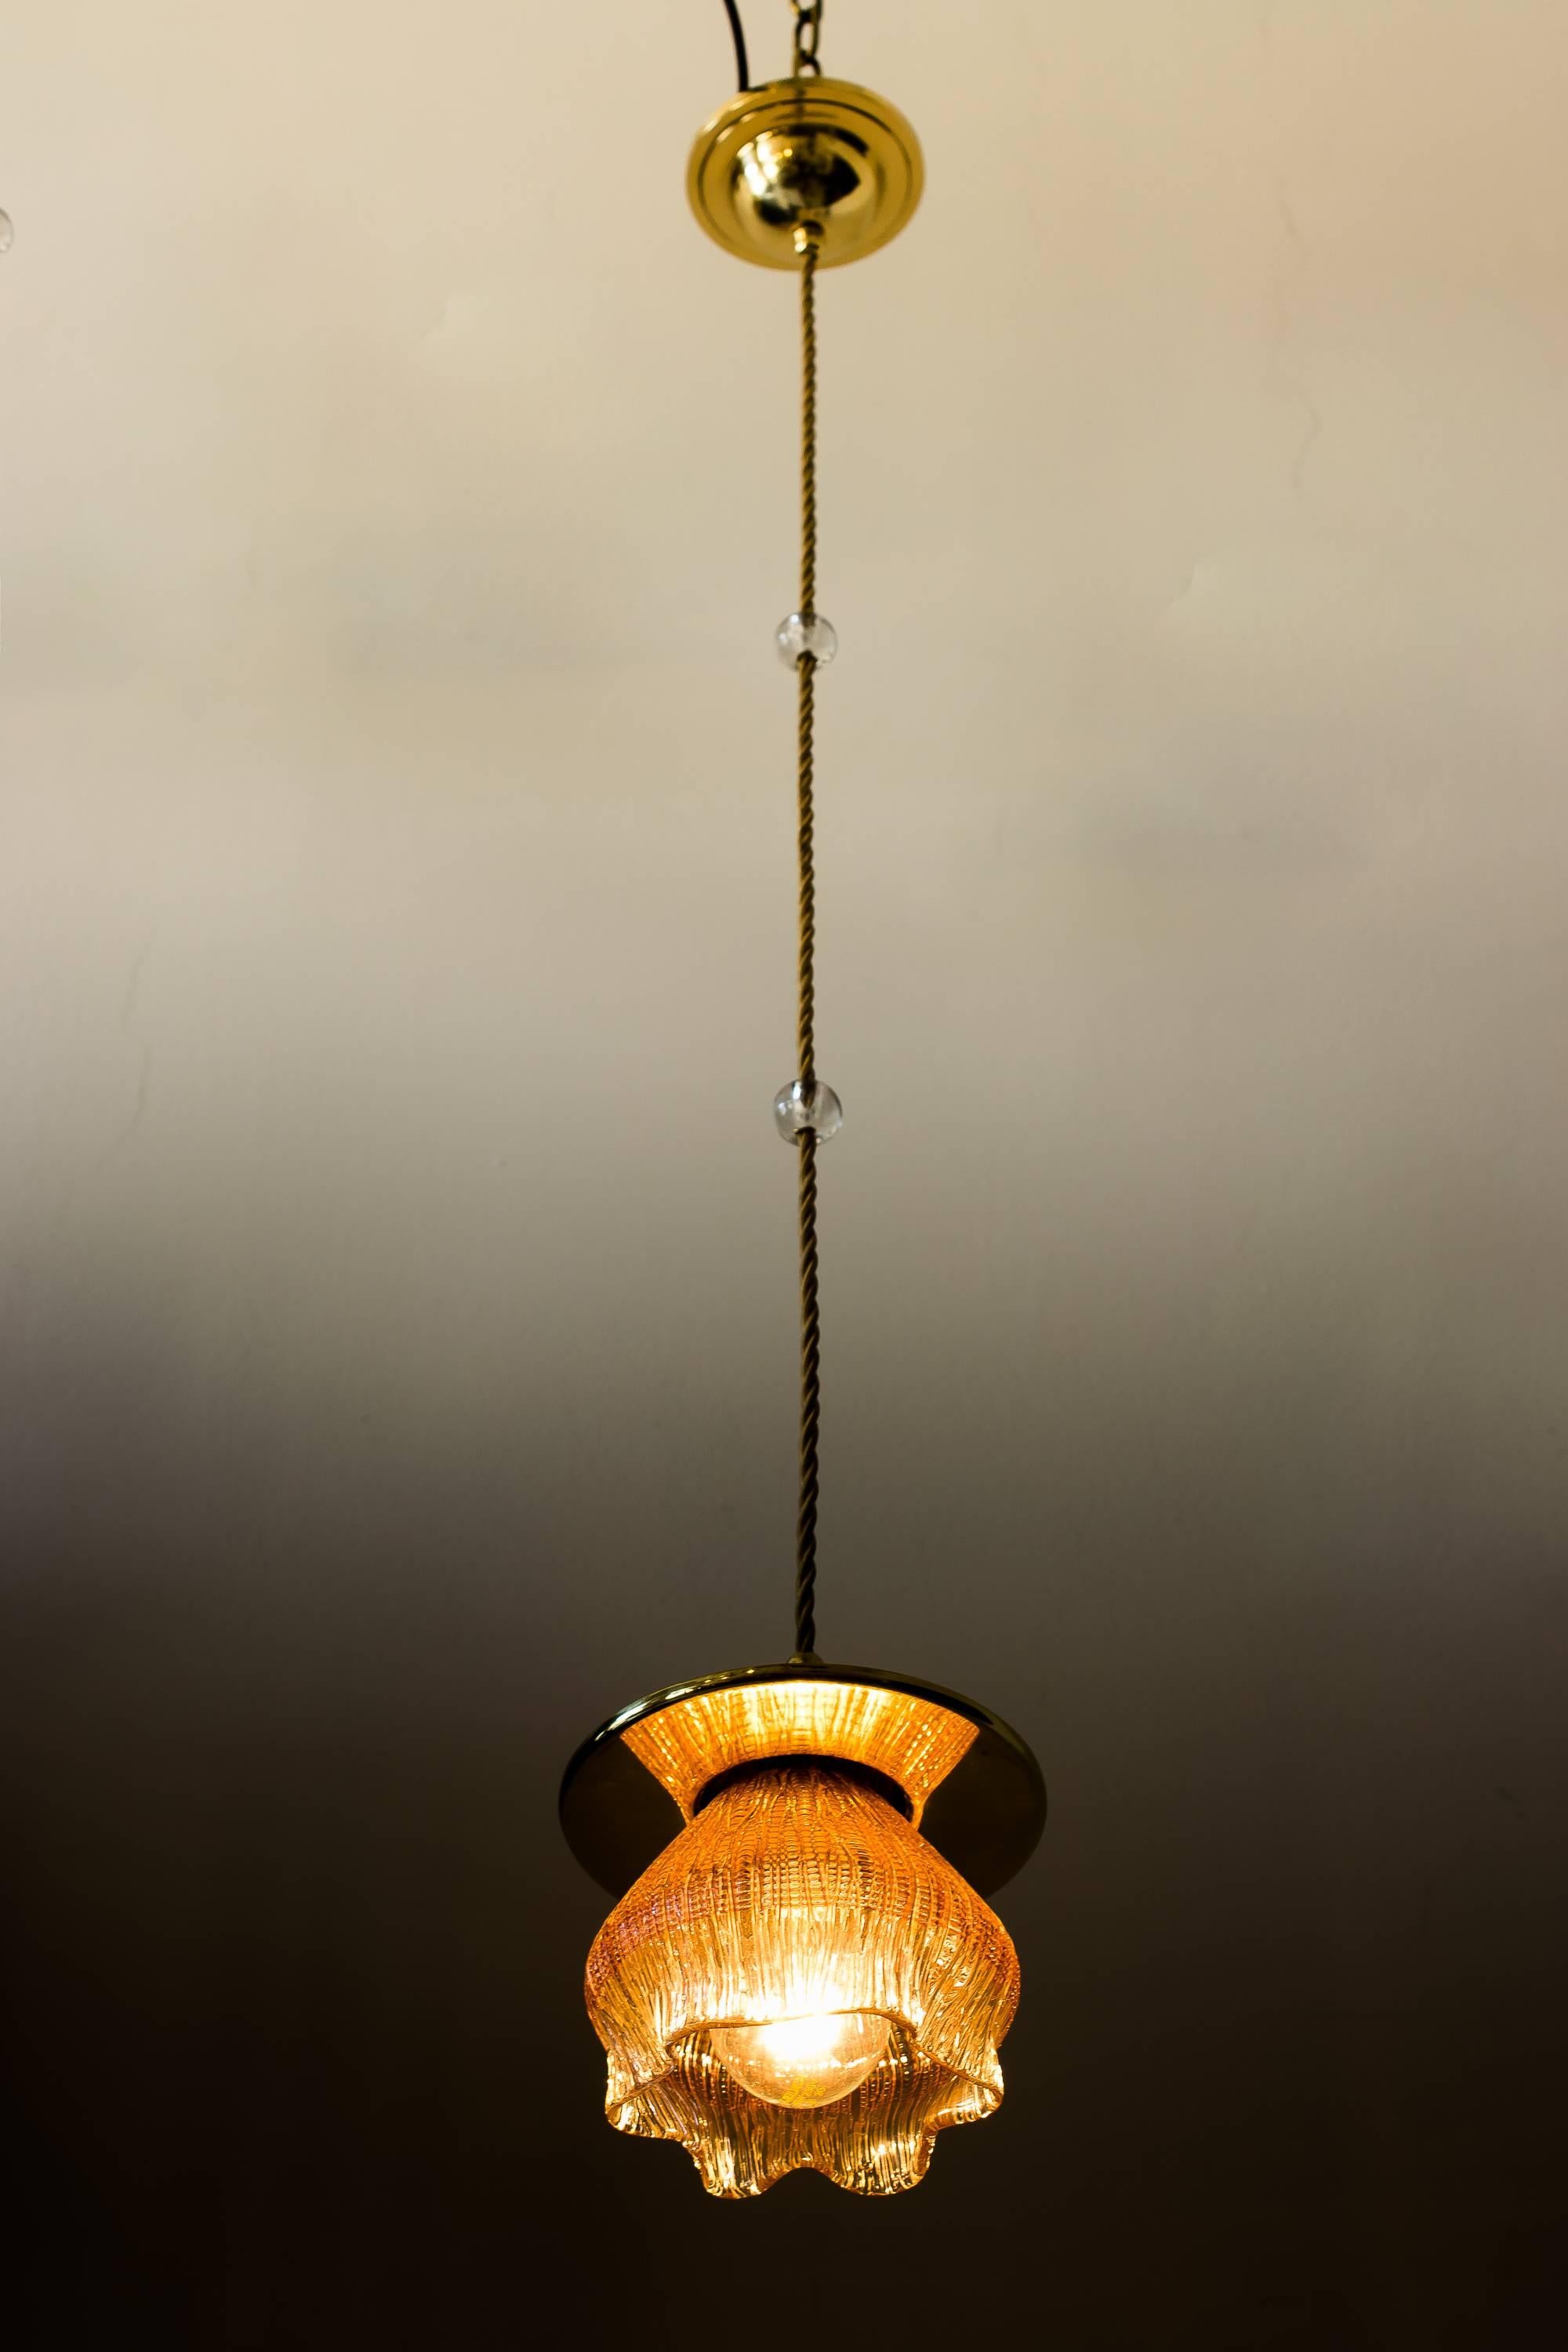 Austrian Leopold Bauer Viennese Hanging Lamp with Loetz Witwe “Blitzglas” Shade For Sale